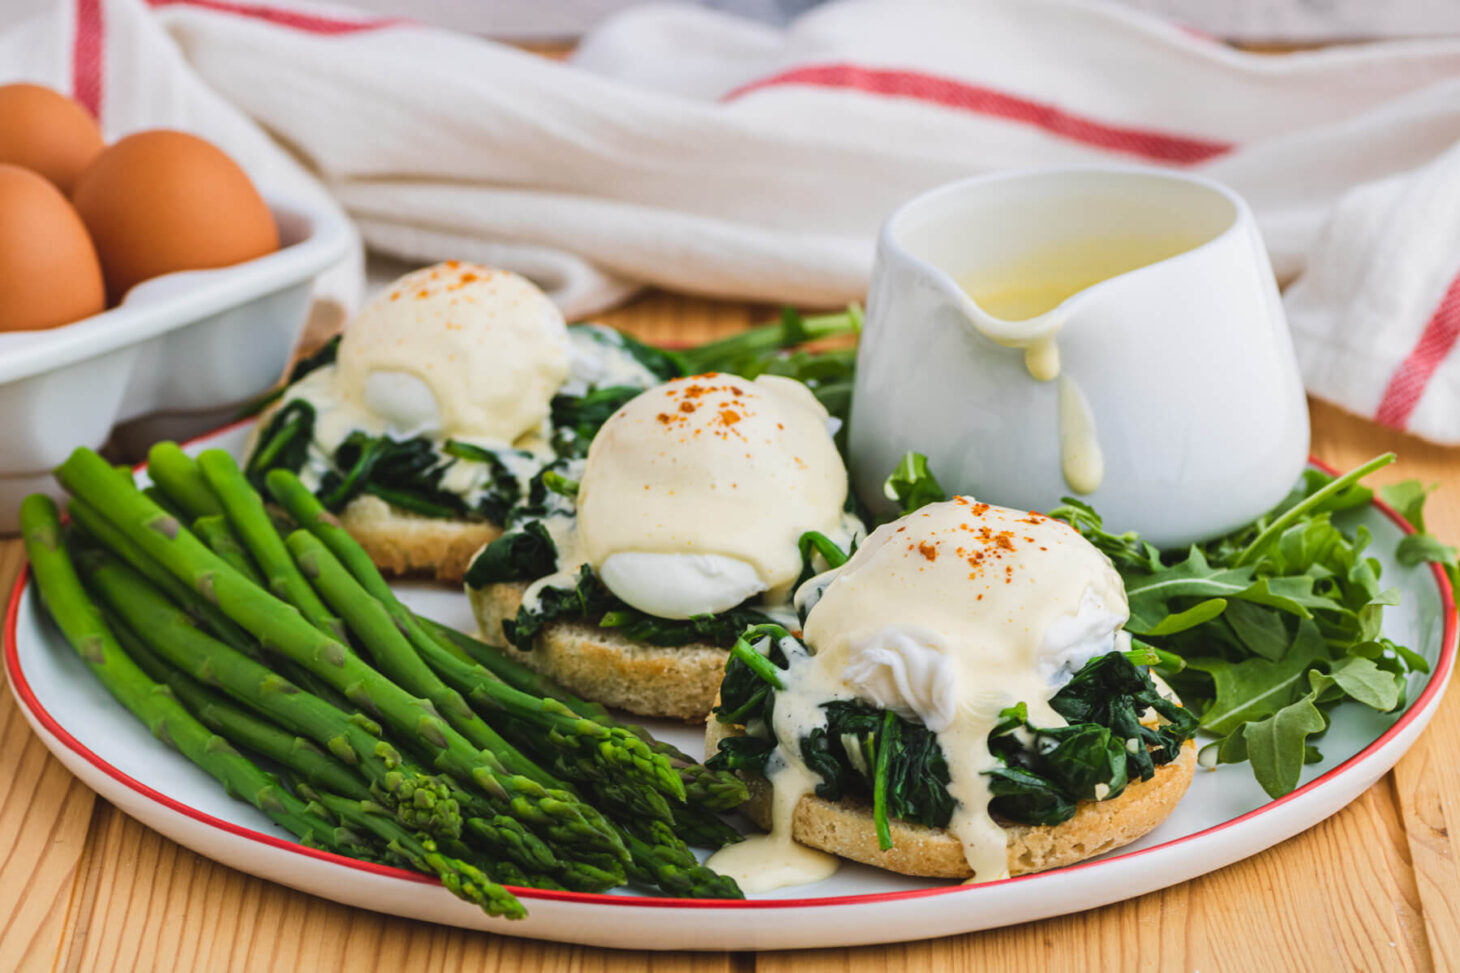 A red rimmed white plate holding two poached eggs covered in creamy yellow hollandaise sauce over a bed of spinach on toasted English muffins with a side of asparagus and baby arugula.